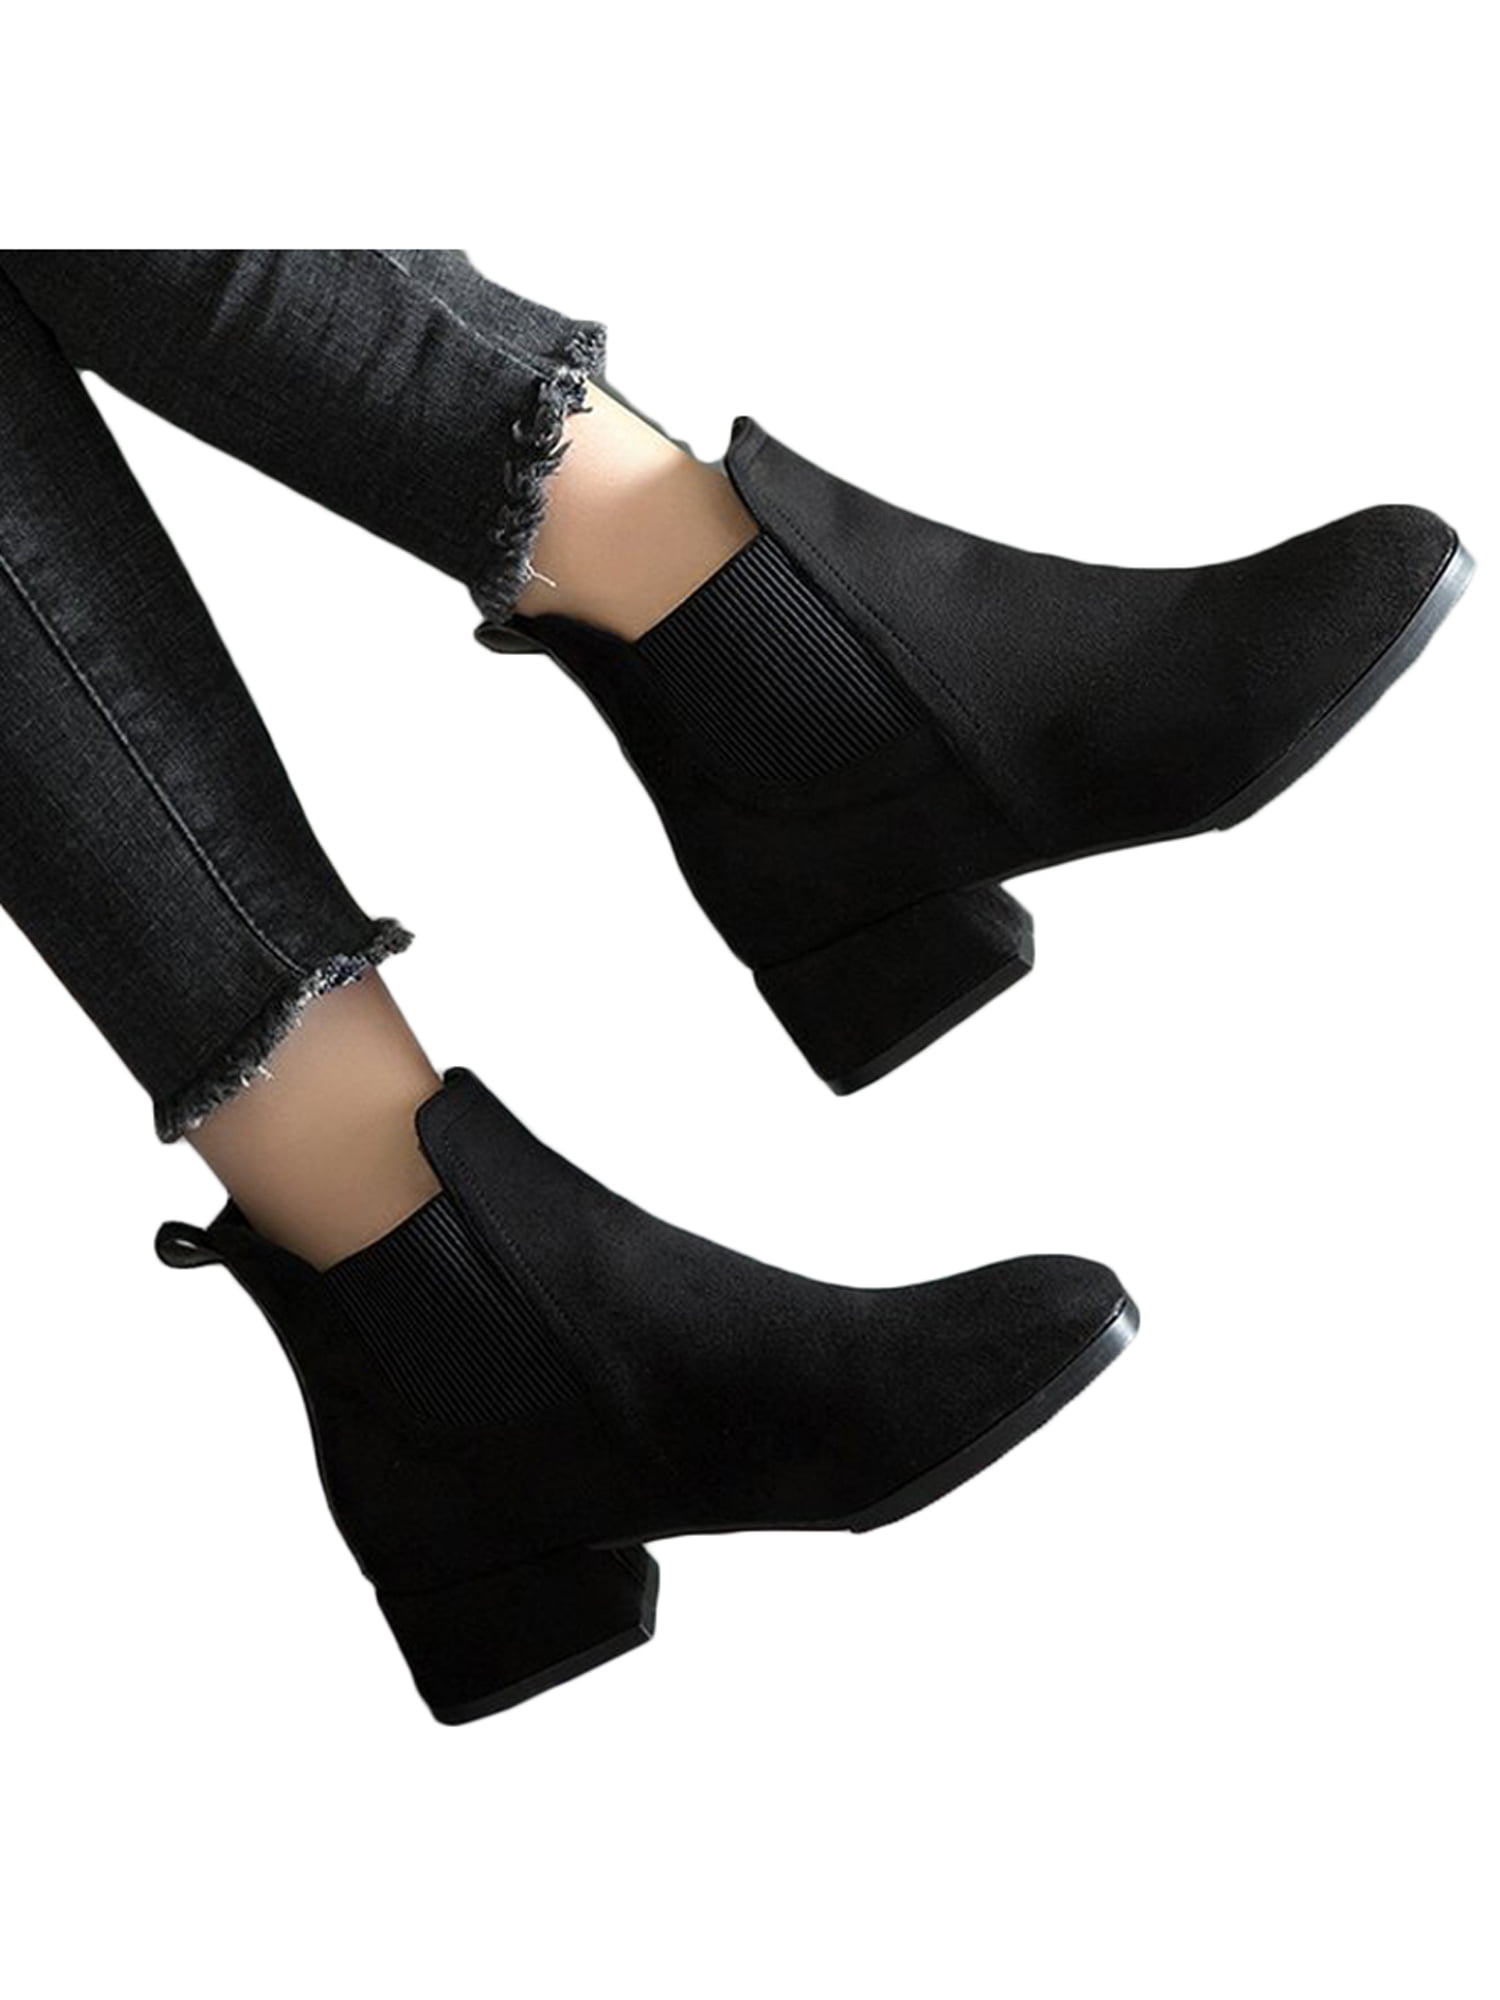 WOMENS LADIES LOW MID HEEL FLAT CHELSEA RIDING ANKLE BOOTS BIKER PULL ON SHOES 